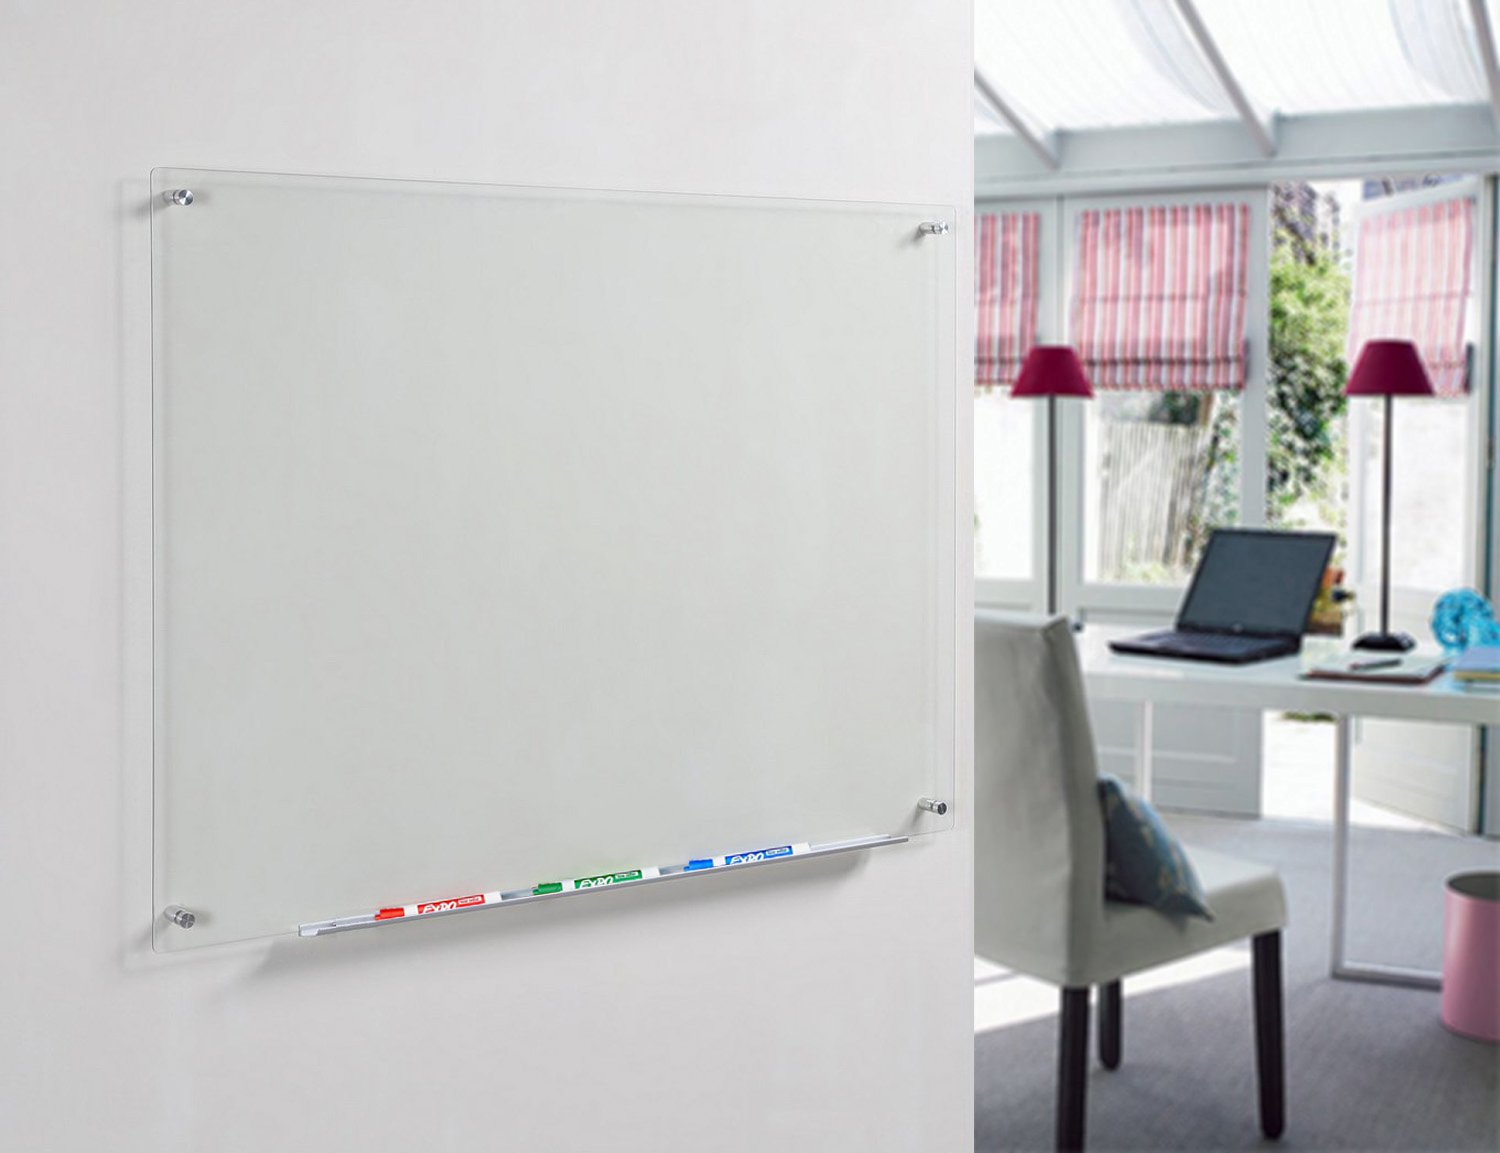 Audio-Visual Direct Clear Glass Dry-Erase Board Set - 24" x 36"